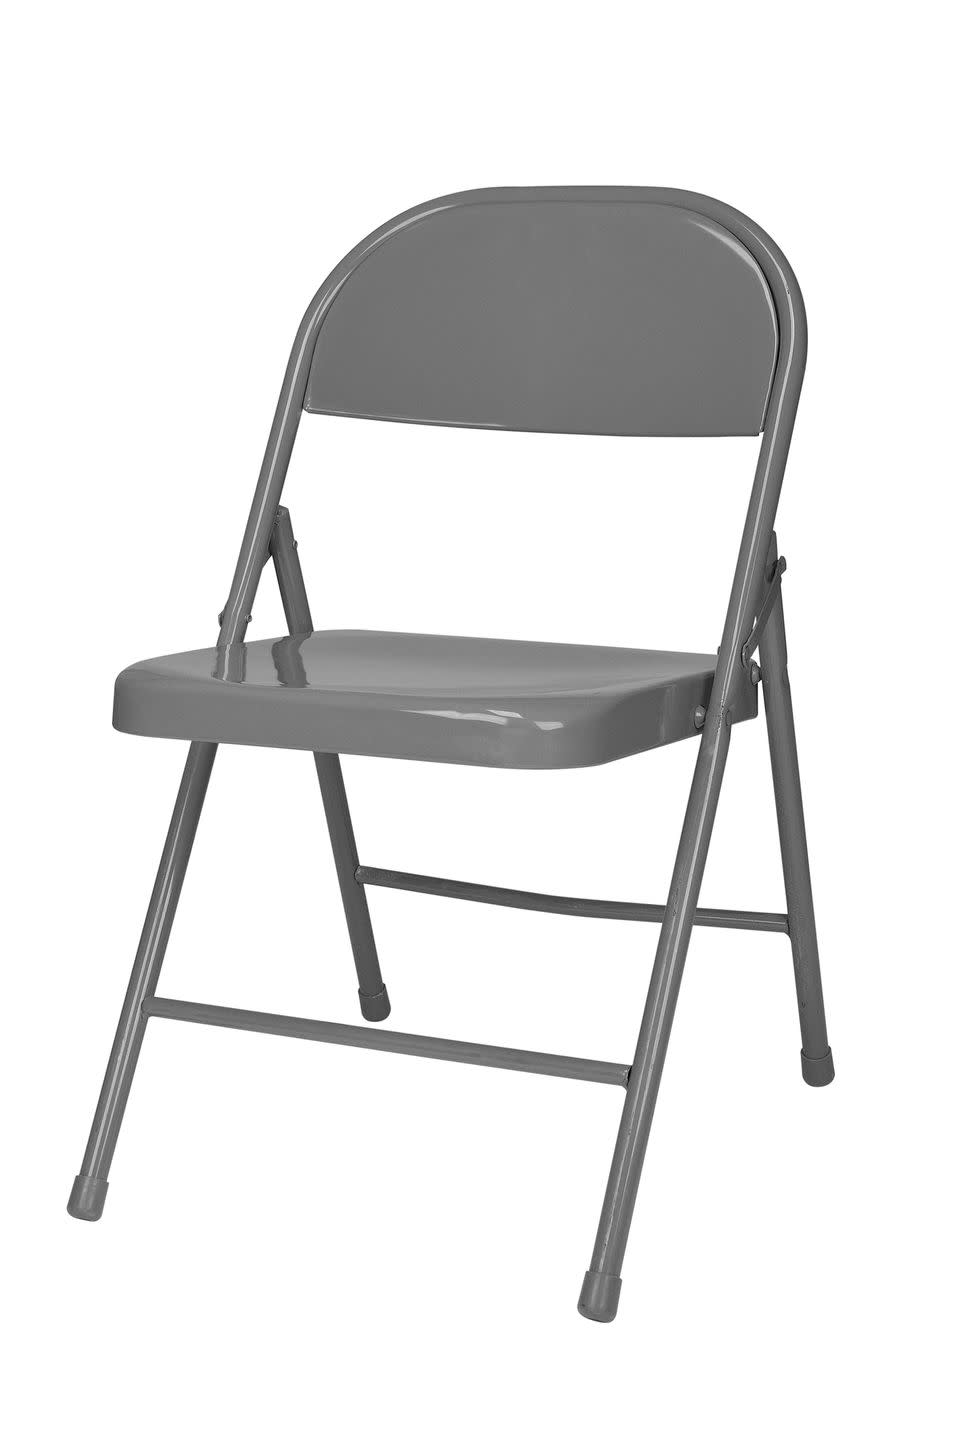 3) Use a folding chair as a bench for triceps dips.